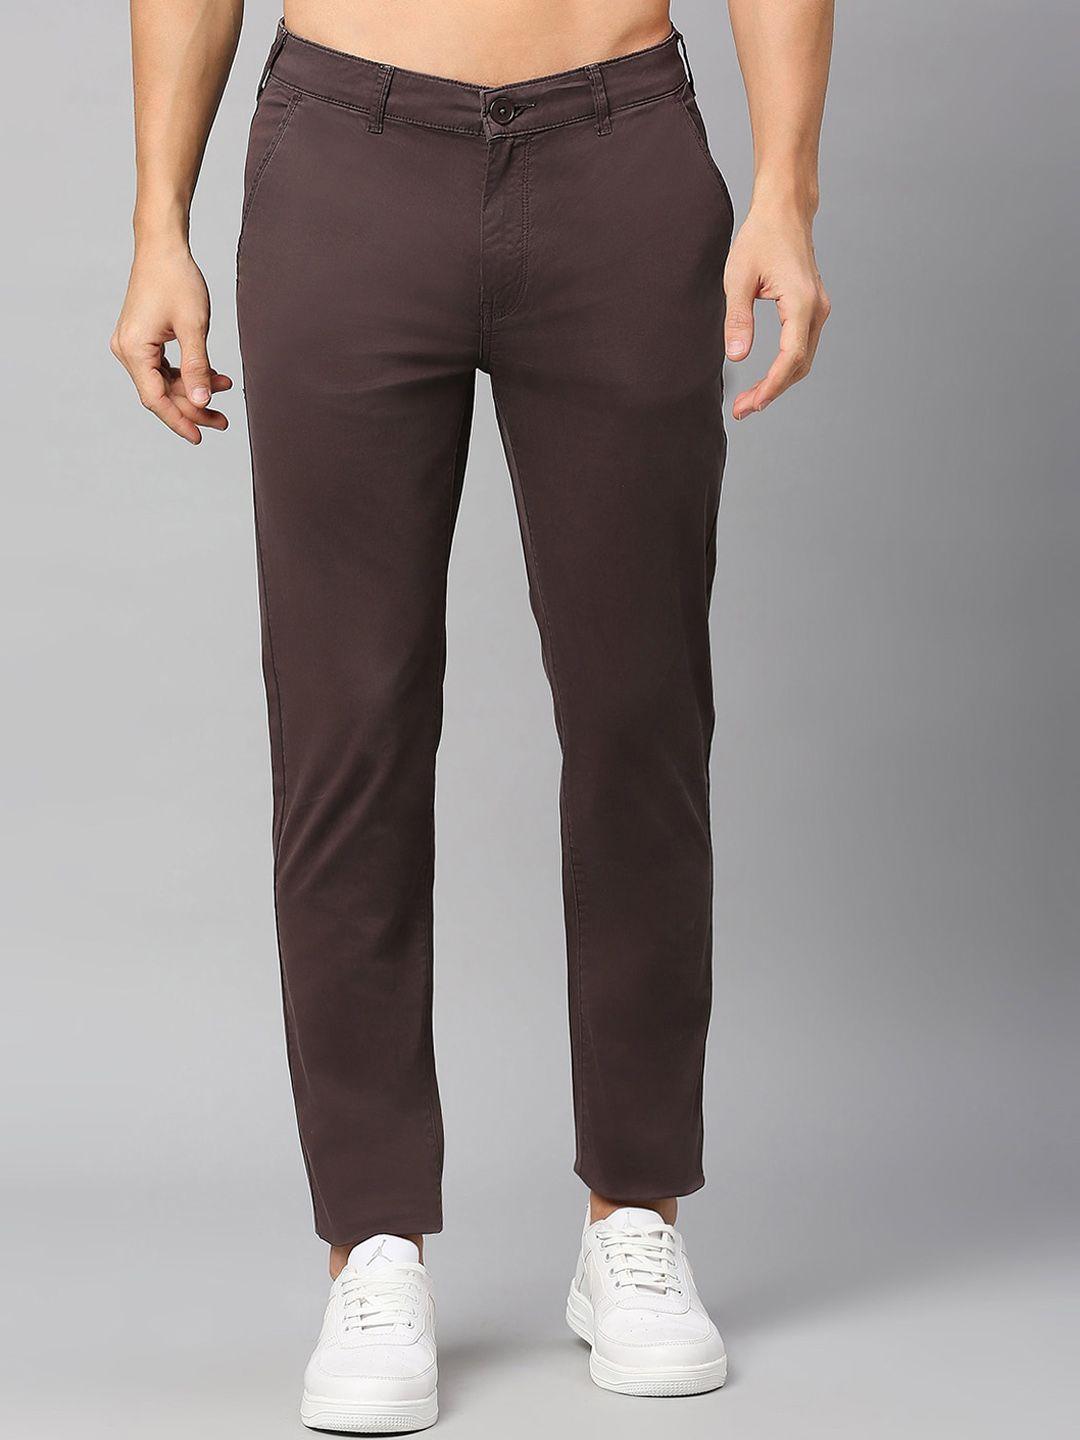 here&now women slim fit trousers